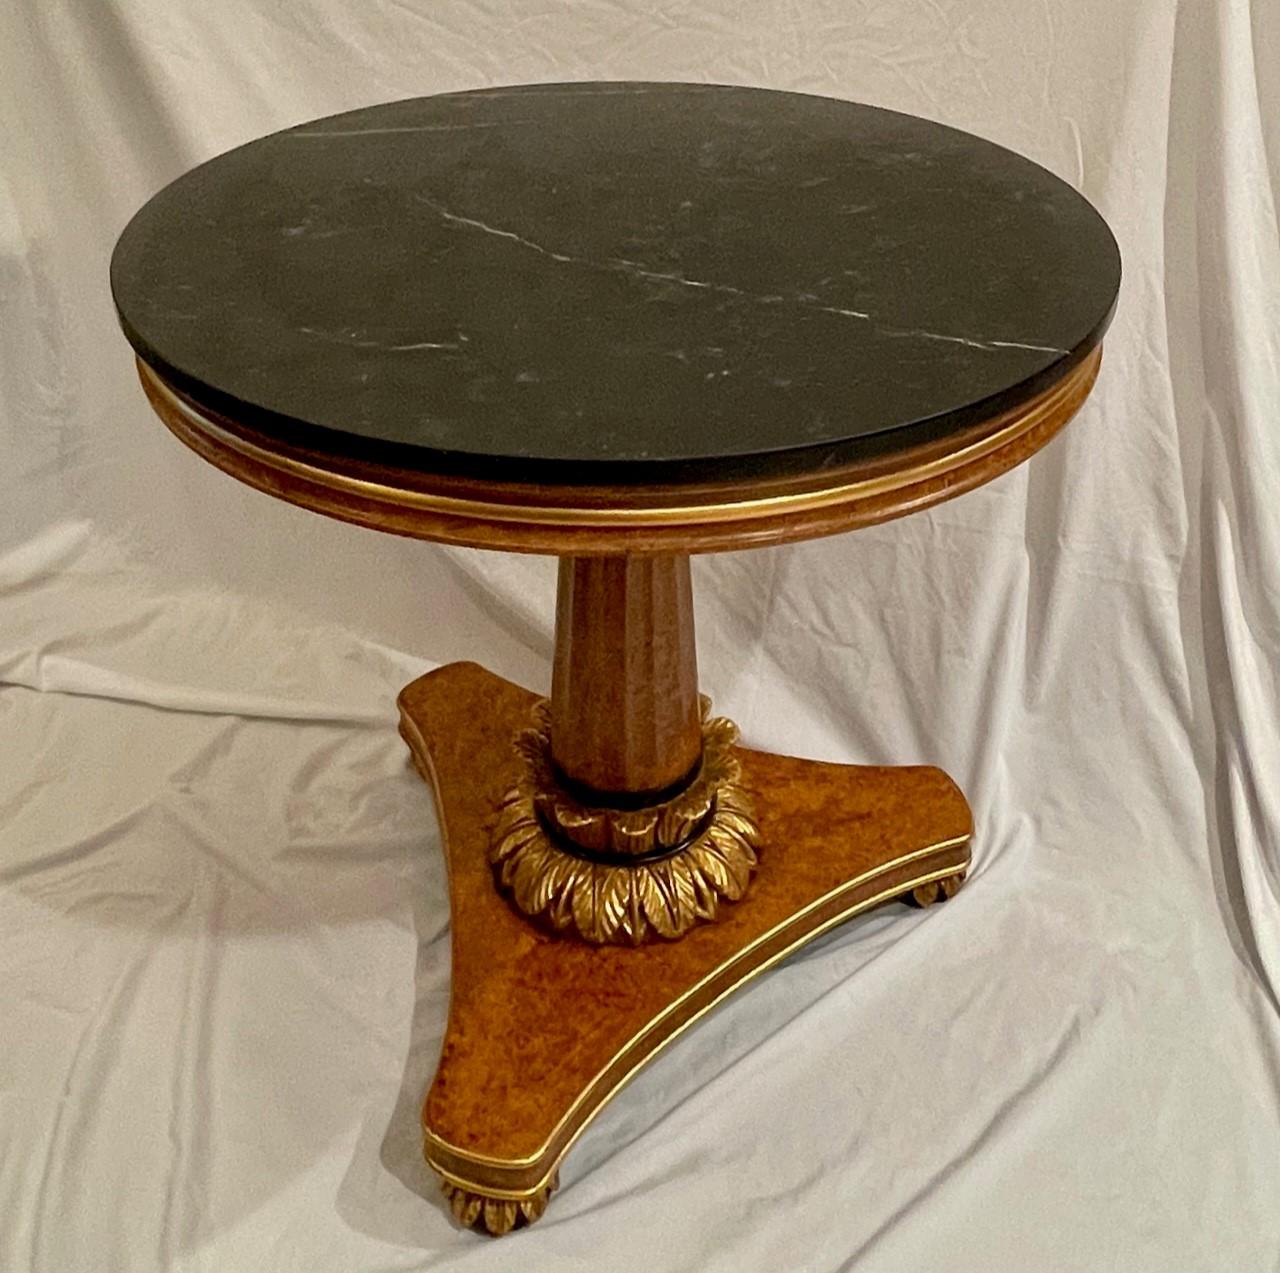 Biedermeier Table Carved Giltwood Marquina Marble Top Invitinghome In Good Condition For Sale In Vero Beach, FL